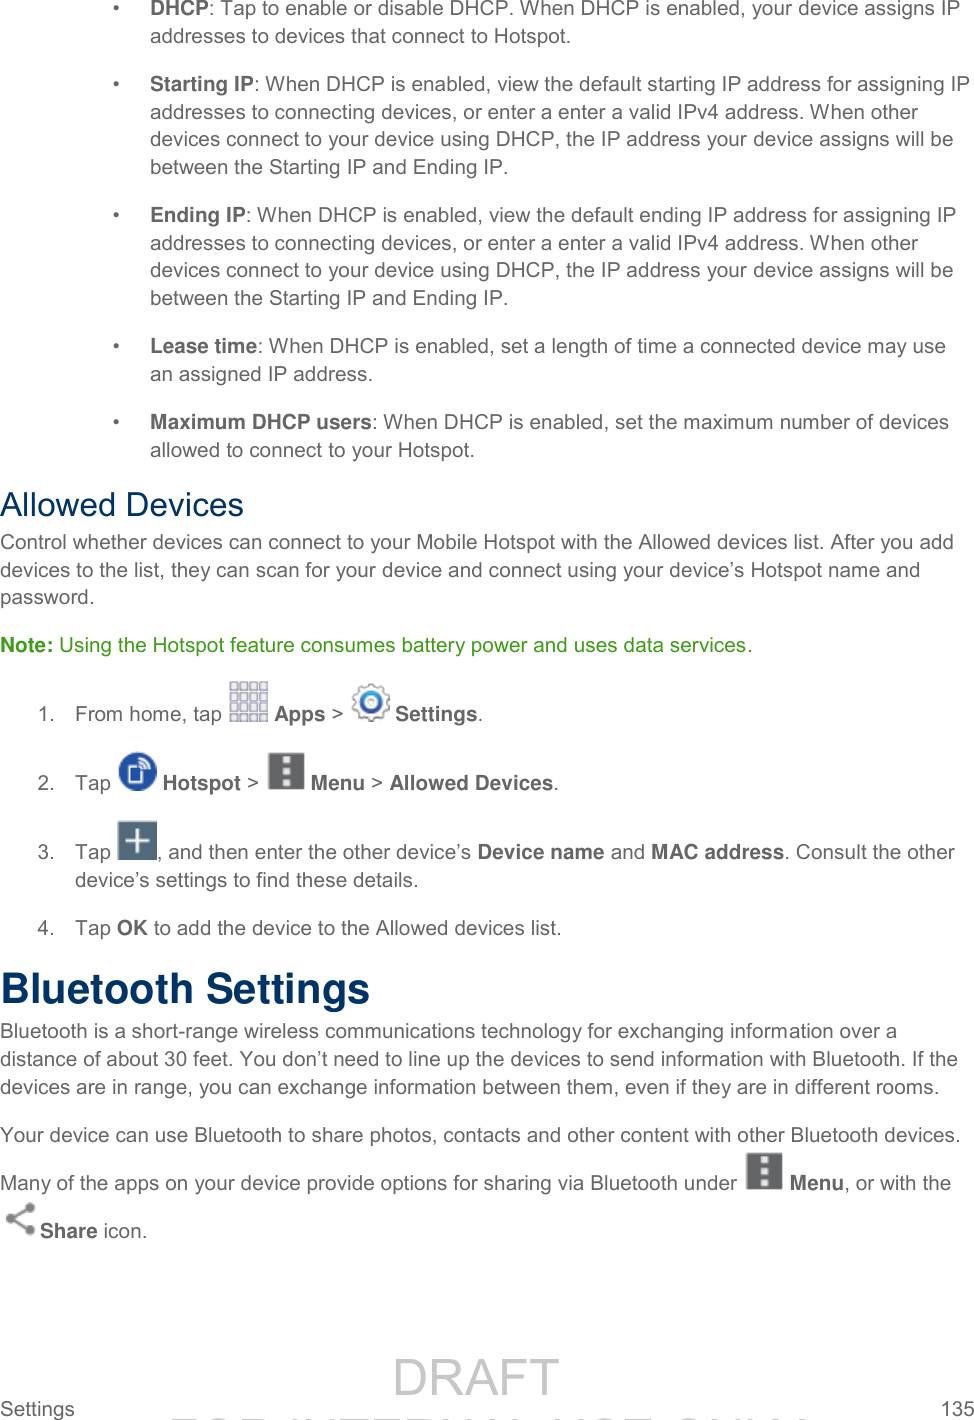                 DRAFT FOR INTERNAL USE ONLY Settings  135   • DHCP: Tap to enable or disable DHCP. When DHCP is enabled, your device assigns IP addresses to devices that connect to Hotspot. • Starting IP: When DHCP is enabled, view the default starting IP address for assigning IP addresses to connecting devices, or enter a enter a valid IPv4 address. When other devices connect to your device using DHCP, the IP address your device assigns will be between the Starting IP and Ending IP. • Ending IP: When DHCP is enabled, view the default ending IP address for assigning IP addresses to connecting devices, or enter a enter a valid IPv4 address. When other devices connect to your device using DHCP, the IP address your device assigns will be between the Starting IP and Ending IP. • Lease time: When DHCP is enabled, set a length of time a connected device may use an assigned IP address. • Maximum DHCP users: When DHCP is enabled, set the maximum number of devices allowed to connect to your Hotspot. Allowed Devices Control whether devices can connect to your Mobile Hotspot with the Allowed devices list. After you add devices to the list, they can scan for your device and connect using your device’s Hotspot name and password. Note: Using the Hotspot feature consumes battery power and uses data services. 1.  From home, tap   Apps &gt;   Settings.  2.  Tap   Hotspot &gt;   Menu &gt; Allowed Devices. 3.  Tap  , and then enter the other device’s Device name and MAC address. Consult the other device’s settings to find these details. 4.  Tap OK to add the device to the Allowed devices list. Bluetooth Settings Bluetooth is a short-range wireless communications technology for exchanging information over a distance of about 30 feet. You don’t need to line up the devices to send information with Bluetooth. If the devices are in range, you can exchange information between them, even if they are in different rooms. Your device can use Bluetooth to share photos, contacts and other content with other Bluetooth devices. Many of the apps on your device provide options for sharing via Bluetooth under   Menu, or with the Share icon. 